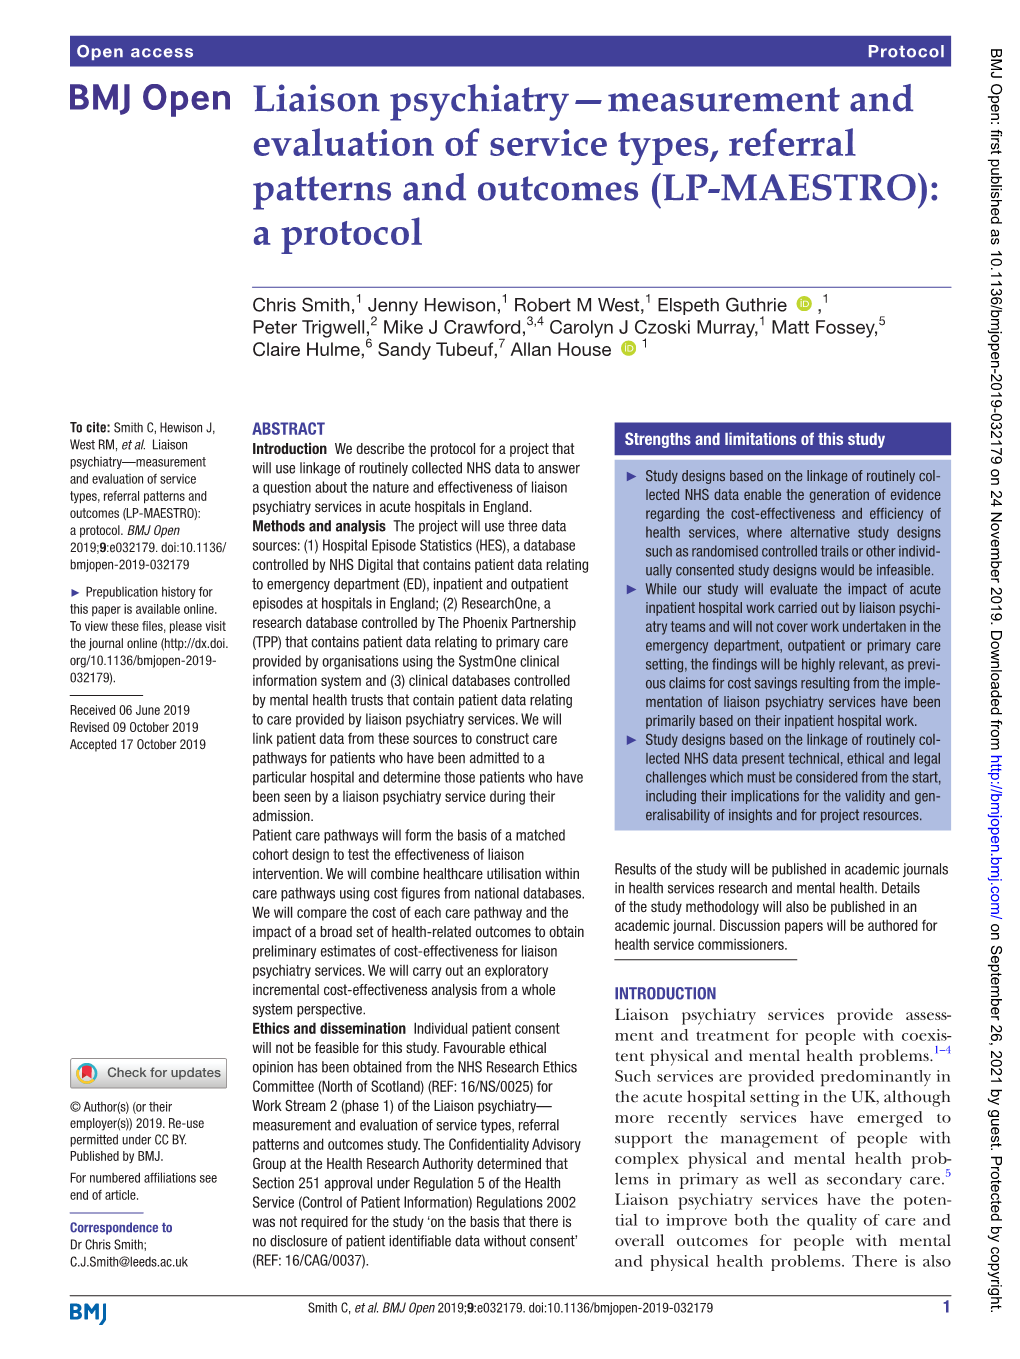 Liaison Psychiatry—Measurement and Evaluation of Service Types, Referral Patterns and Outcomes (LP-MAESTRO):­ a Protocol